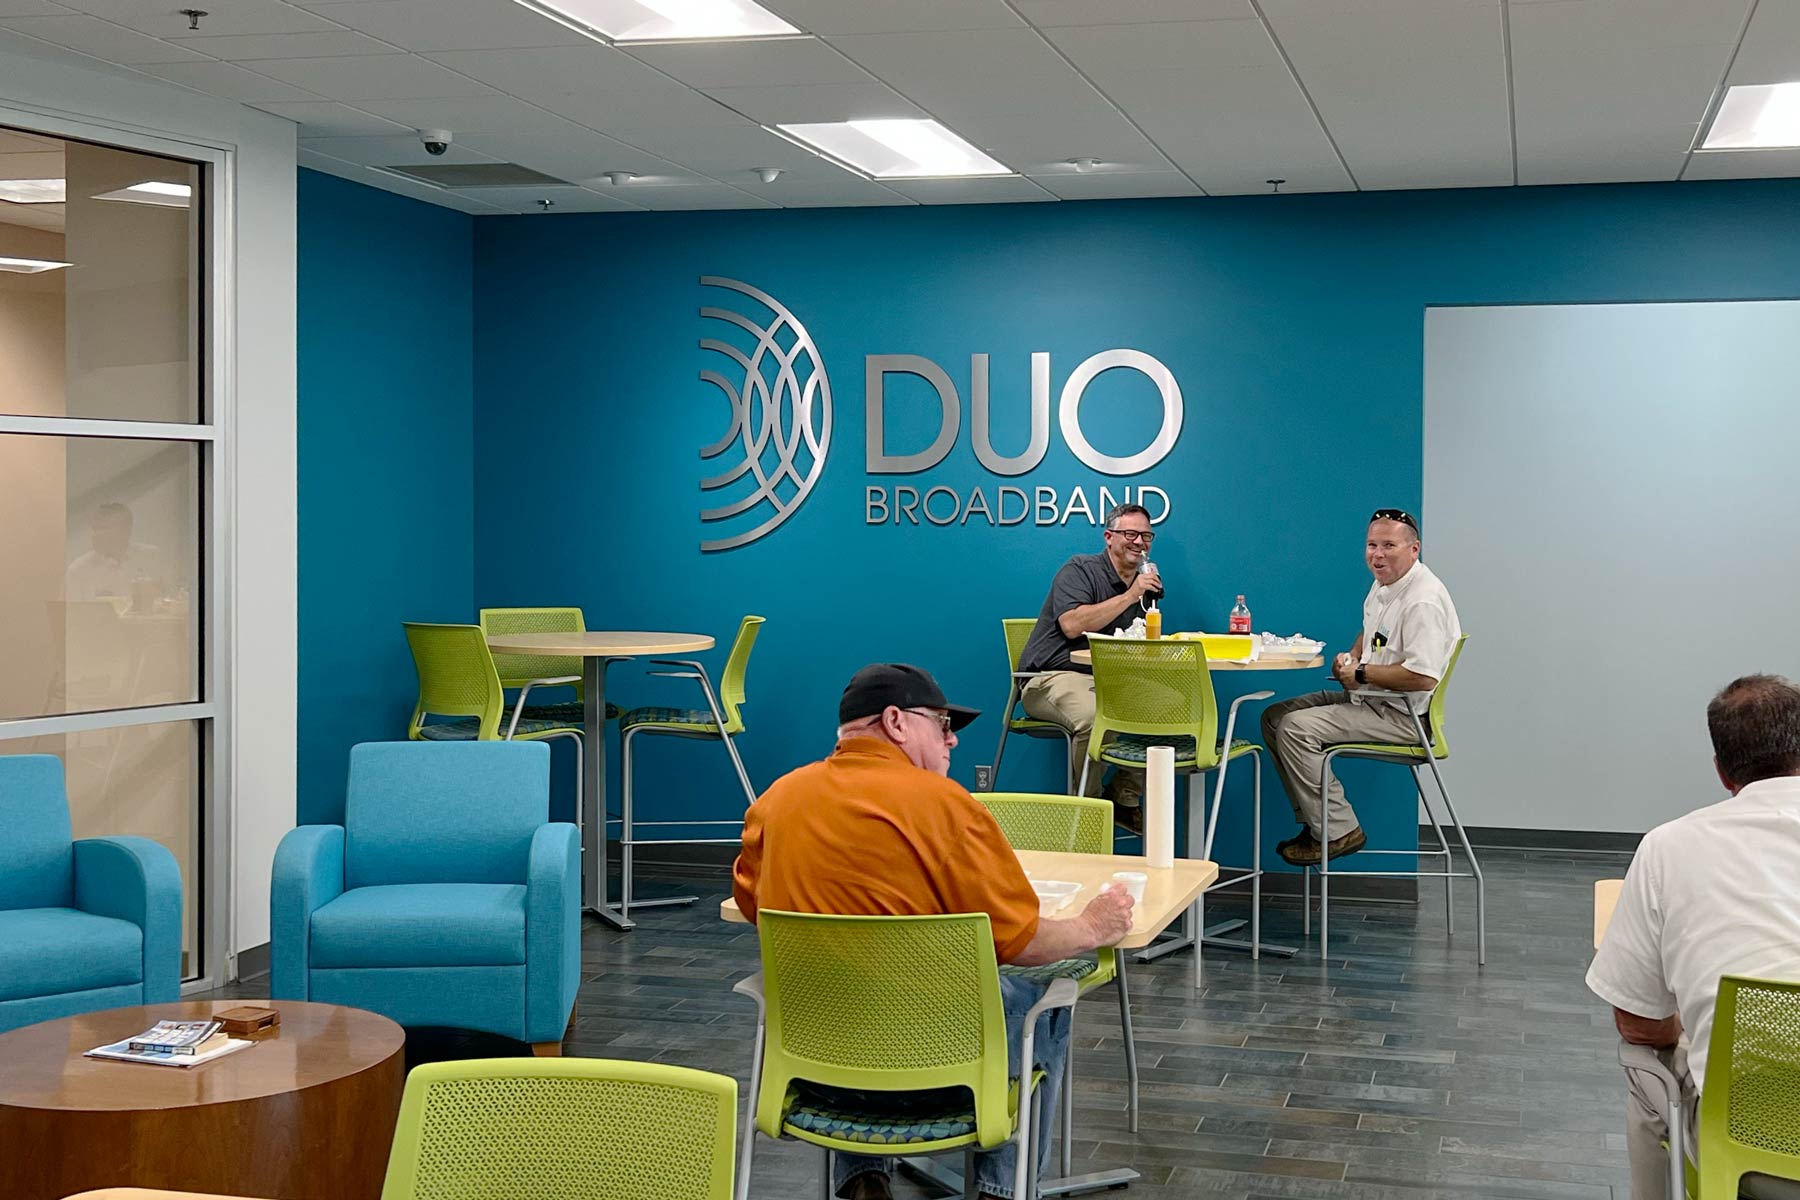 DUO Broadband break room with large logo on the back wall.